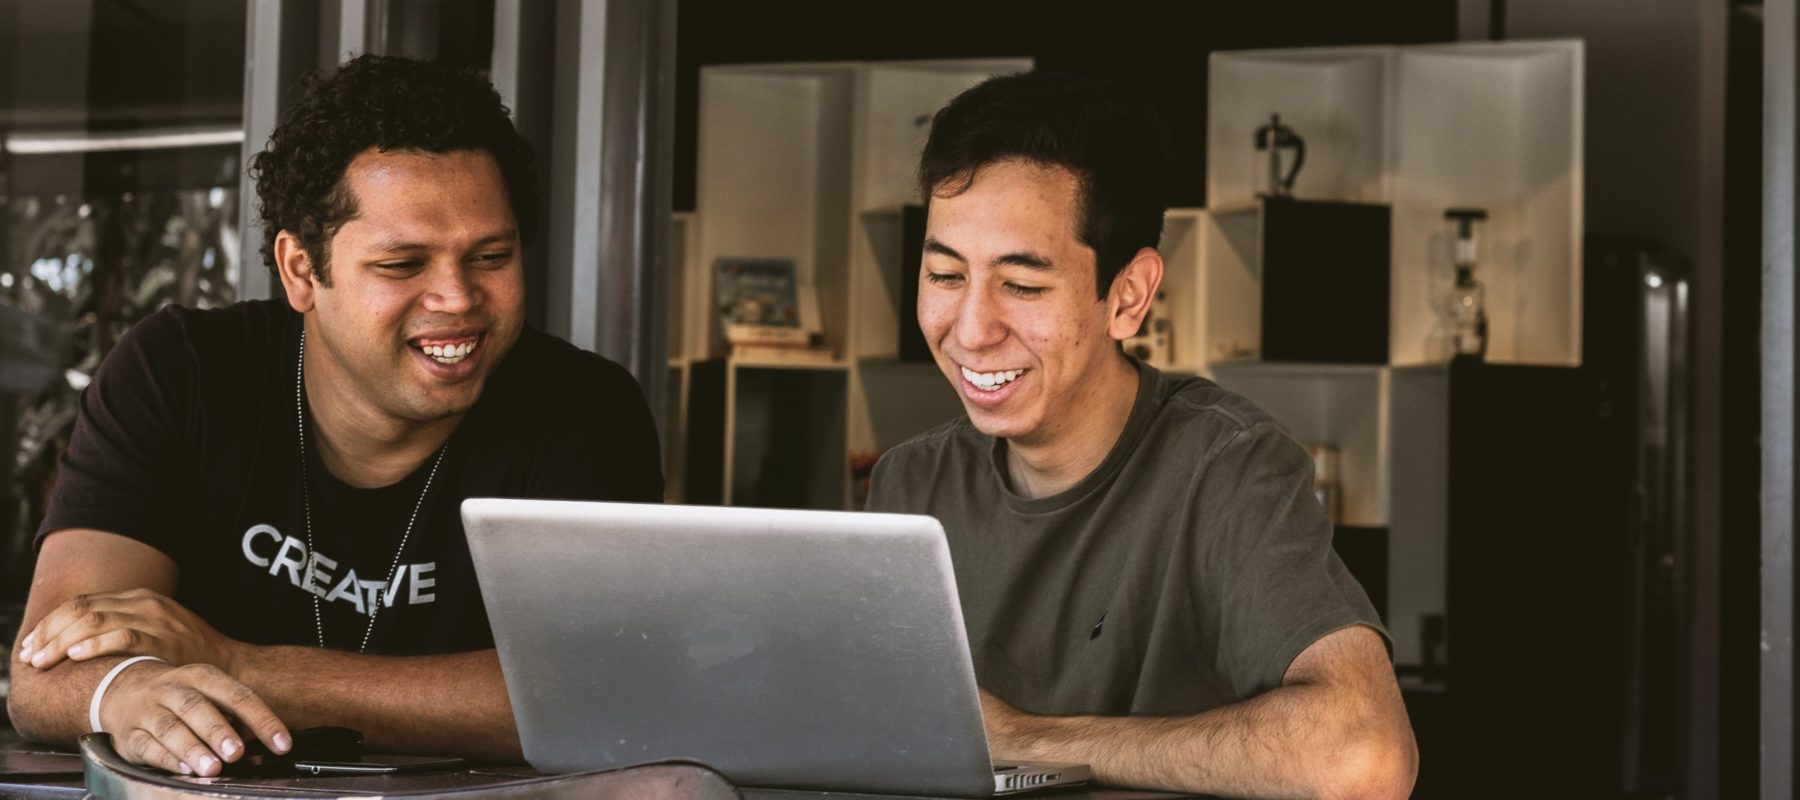 two people looking at one computer smiling